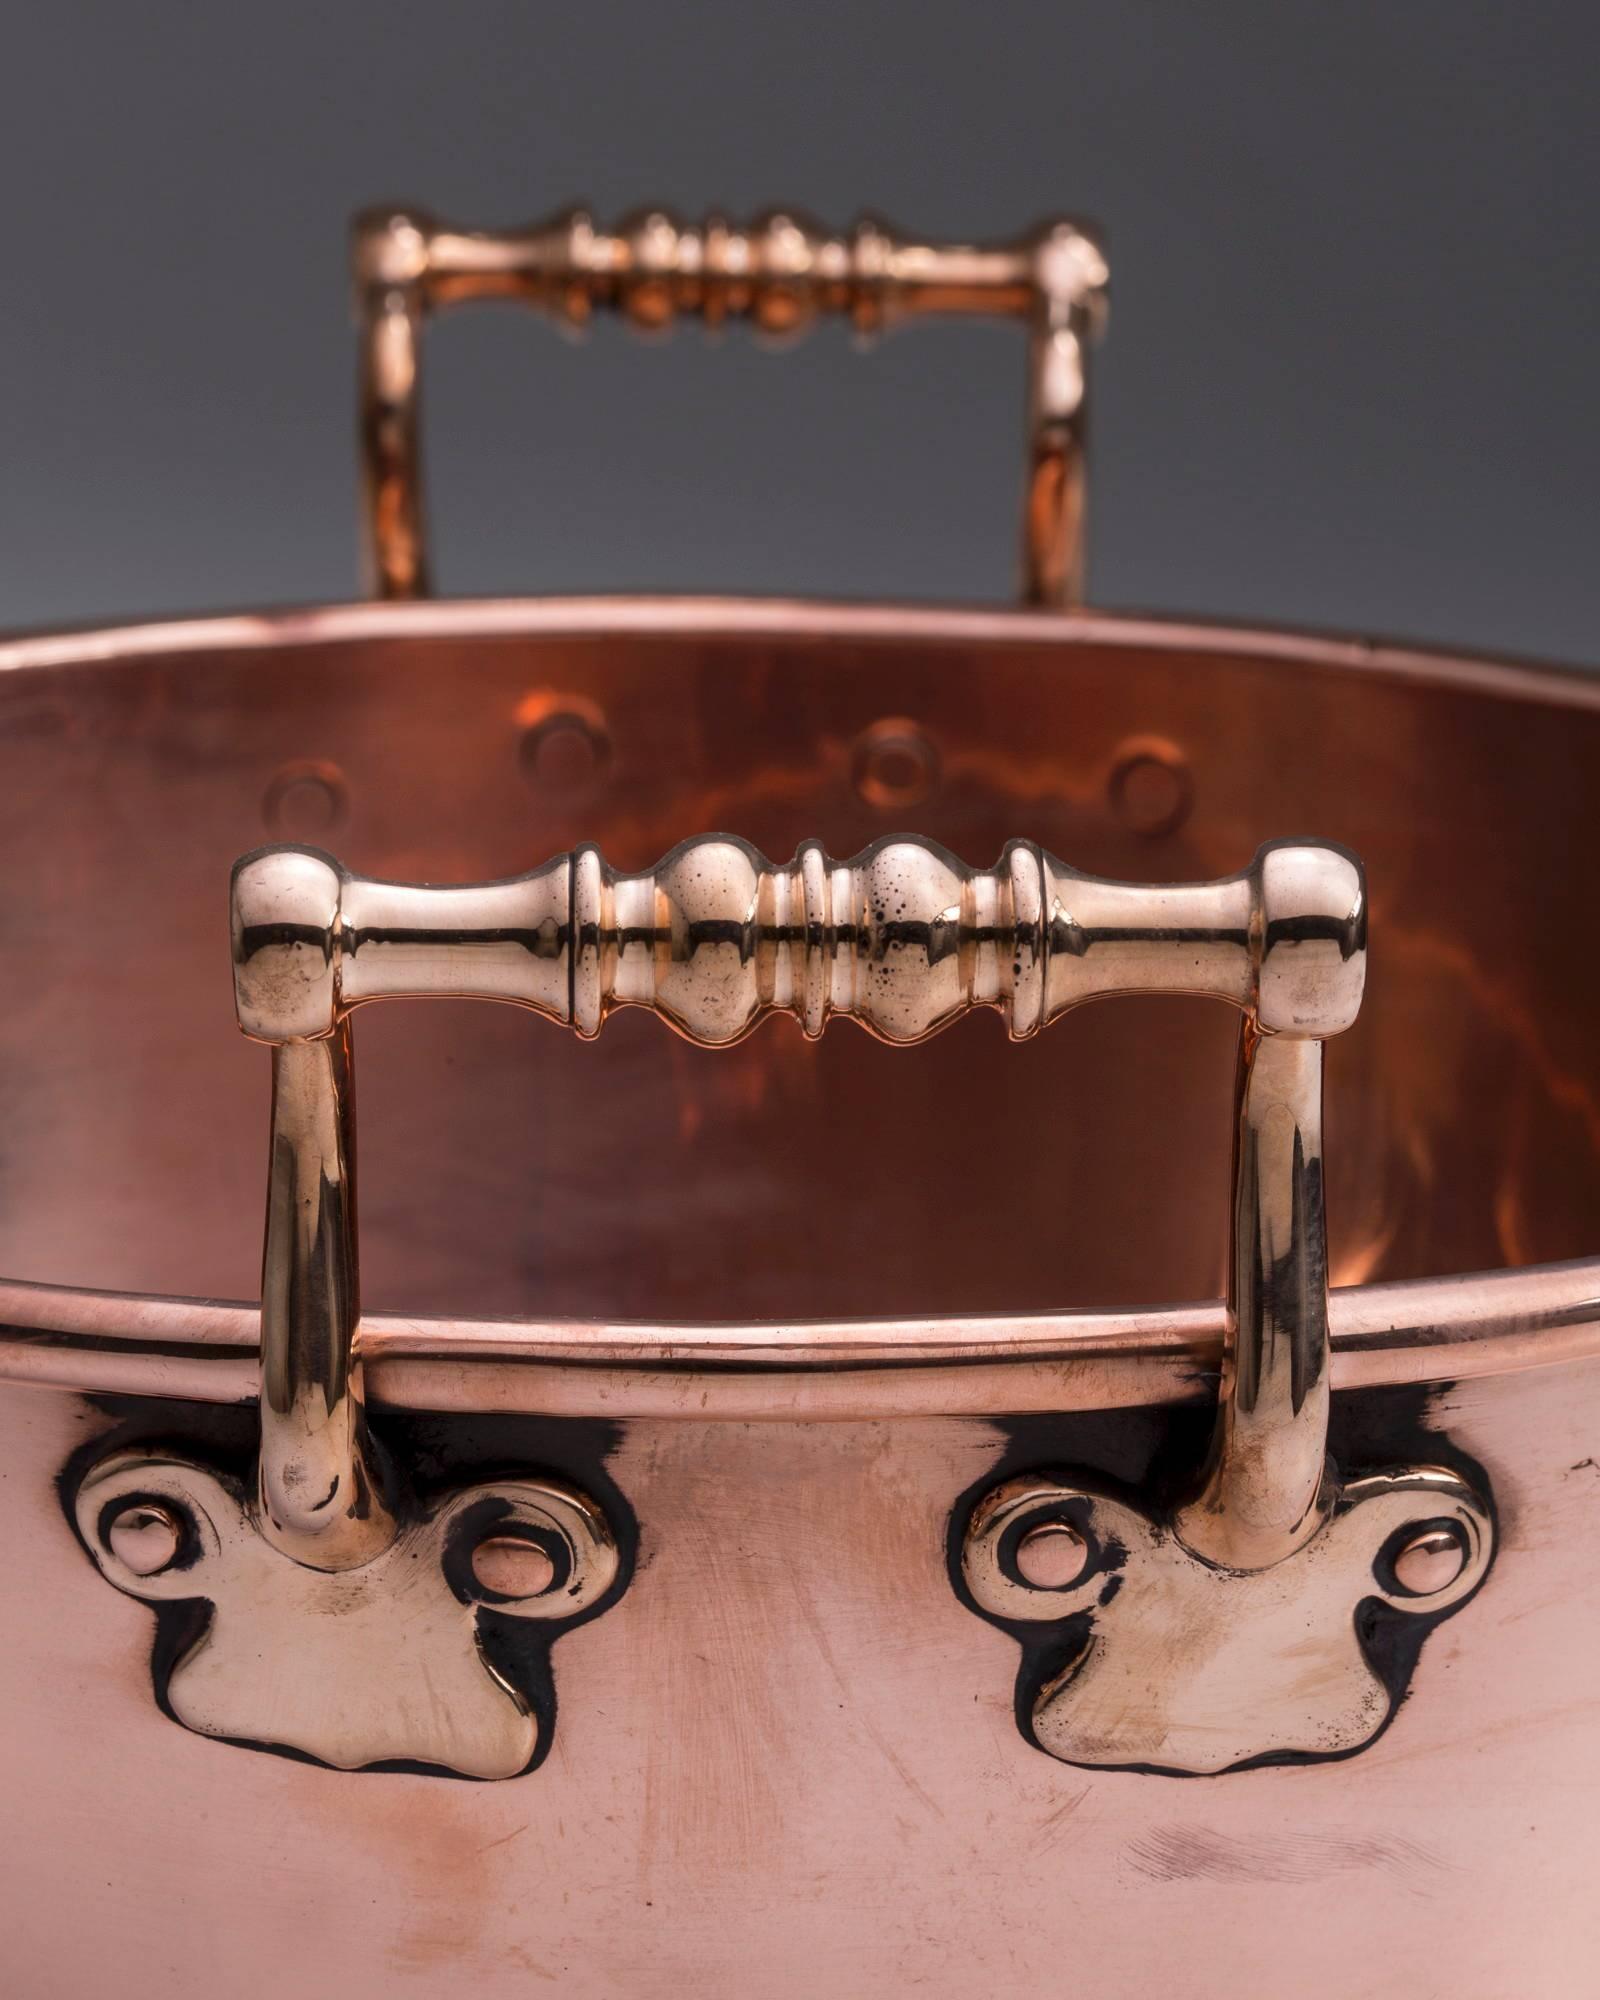 English, copper preserve pan. Unmarked.

Date: circa 1860.

12.625” diameter by 4.125” deep. The total width across the handles is 14.25”.

The handles on this preserve pan are much more ornate than the standard English shape. The piece is